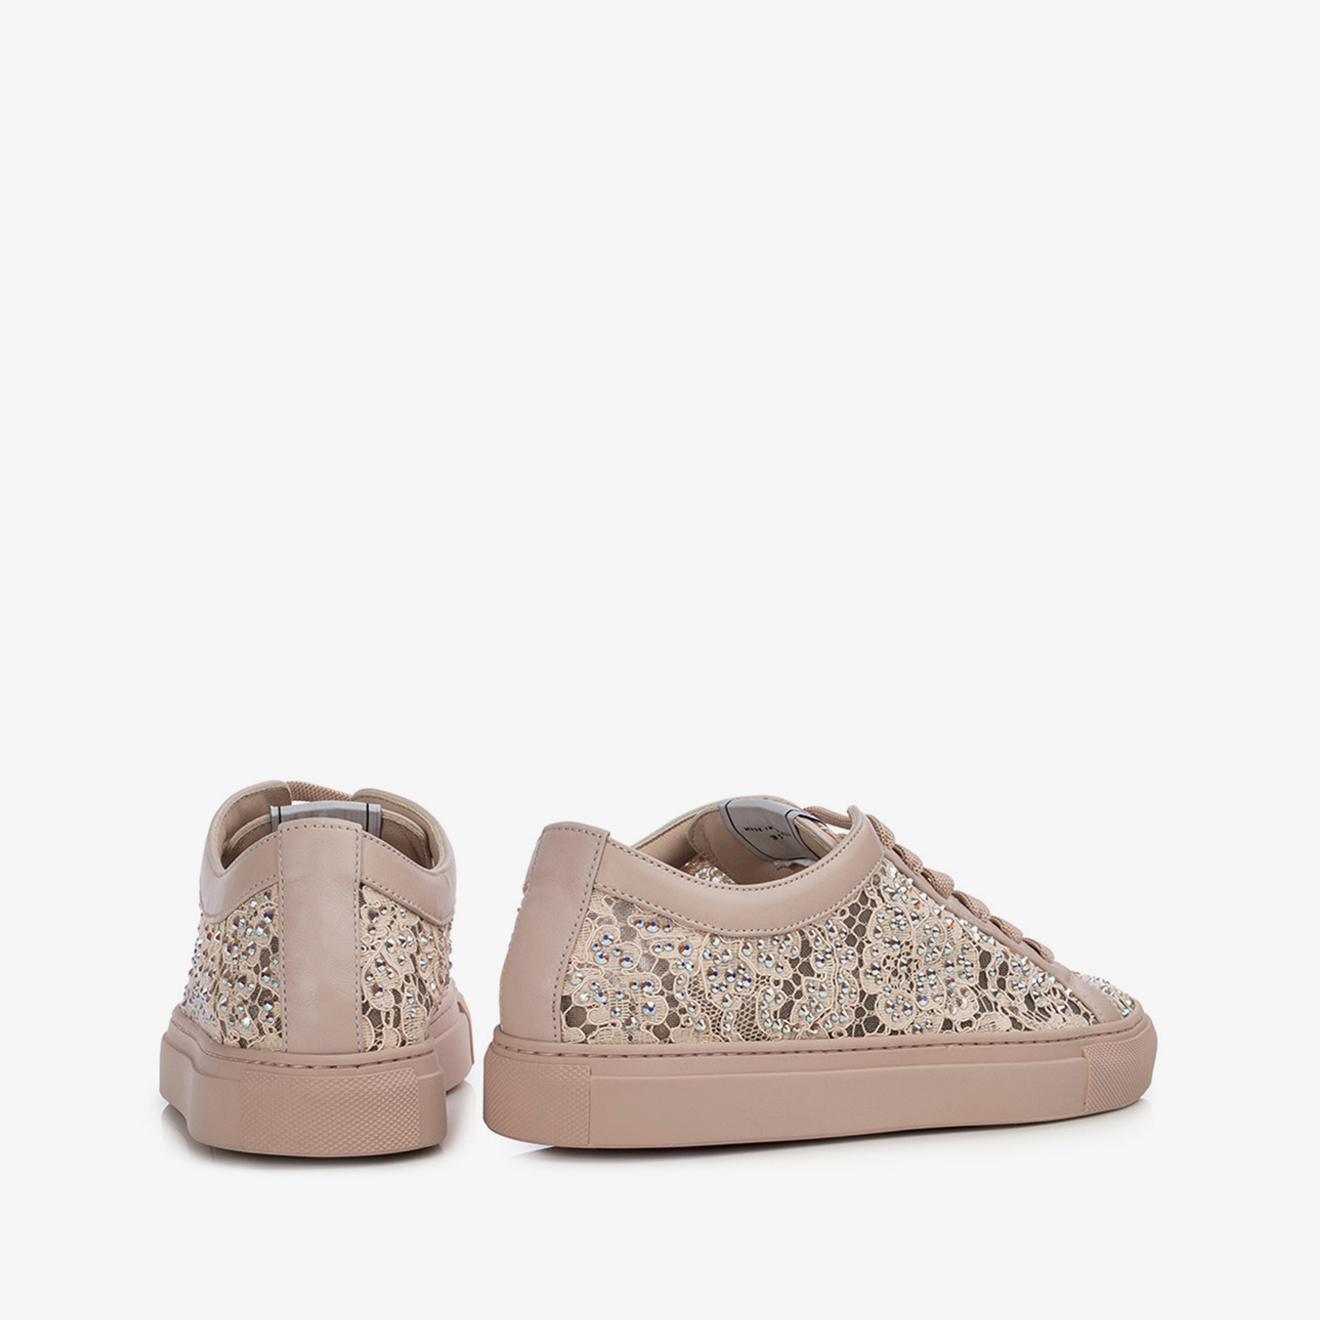 SNEAKER DAISY - Le Silla official outlet